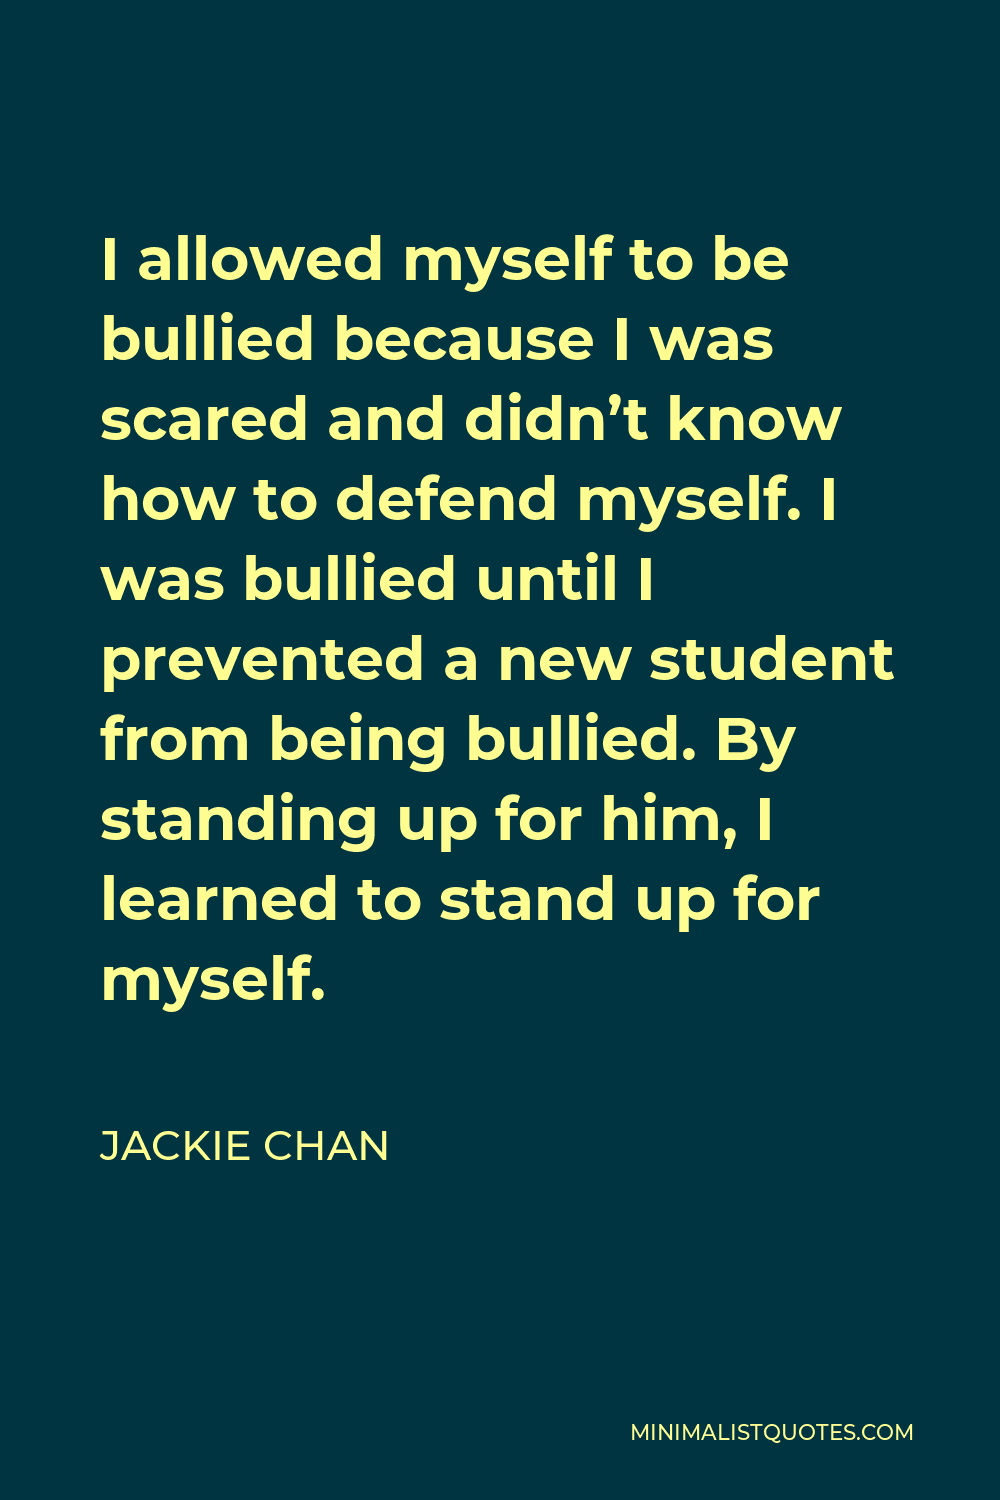 Jackie Chan Quote - I allowed myself to be bullied because I was scared and didn’t know how to defend myself. I was bullied until I prevented a new student from being bullied. By standing up for him, I learned to stand up for myself.